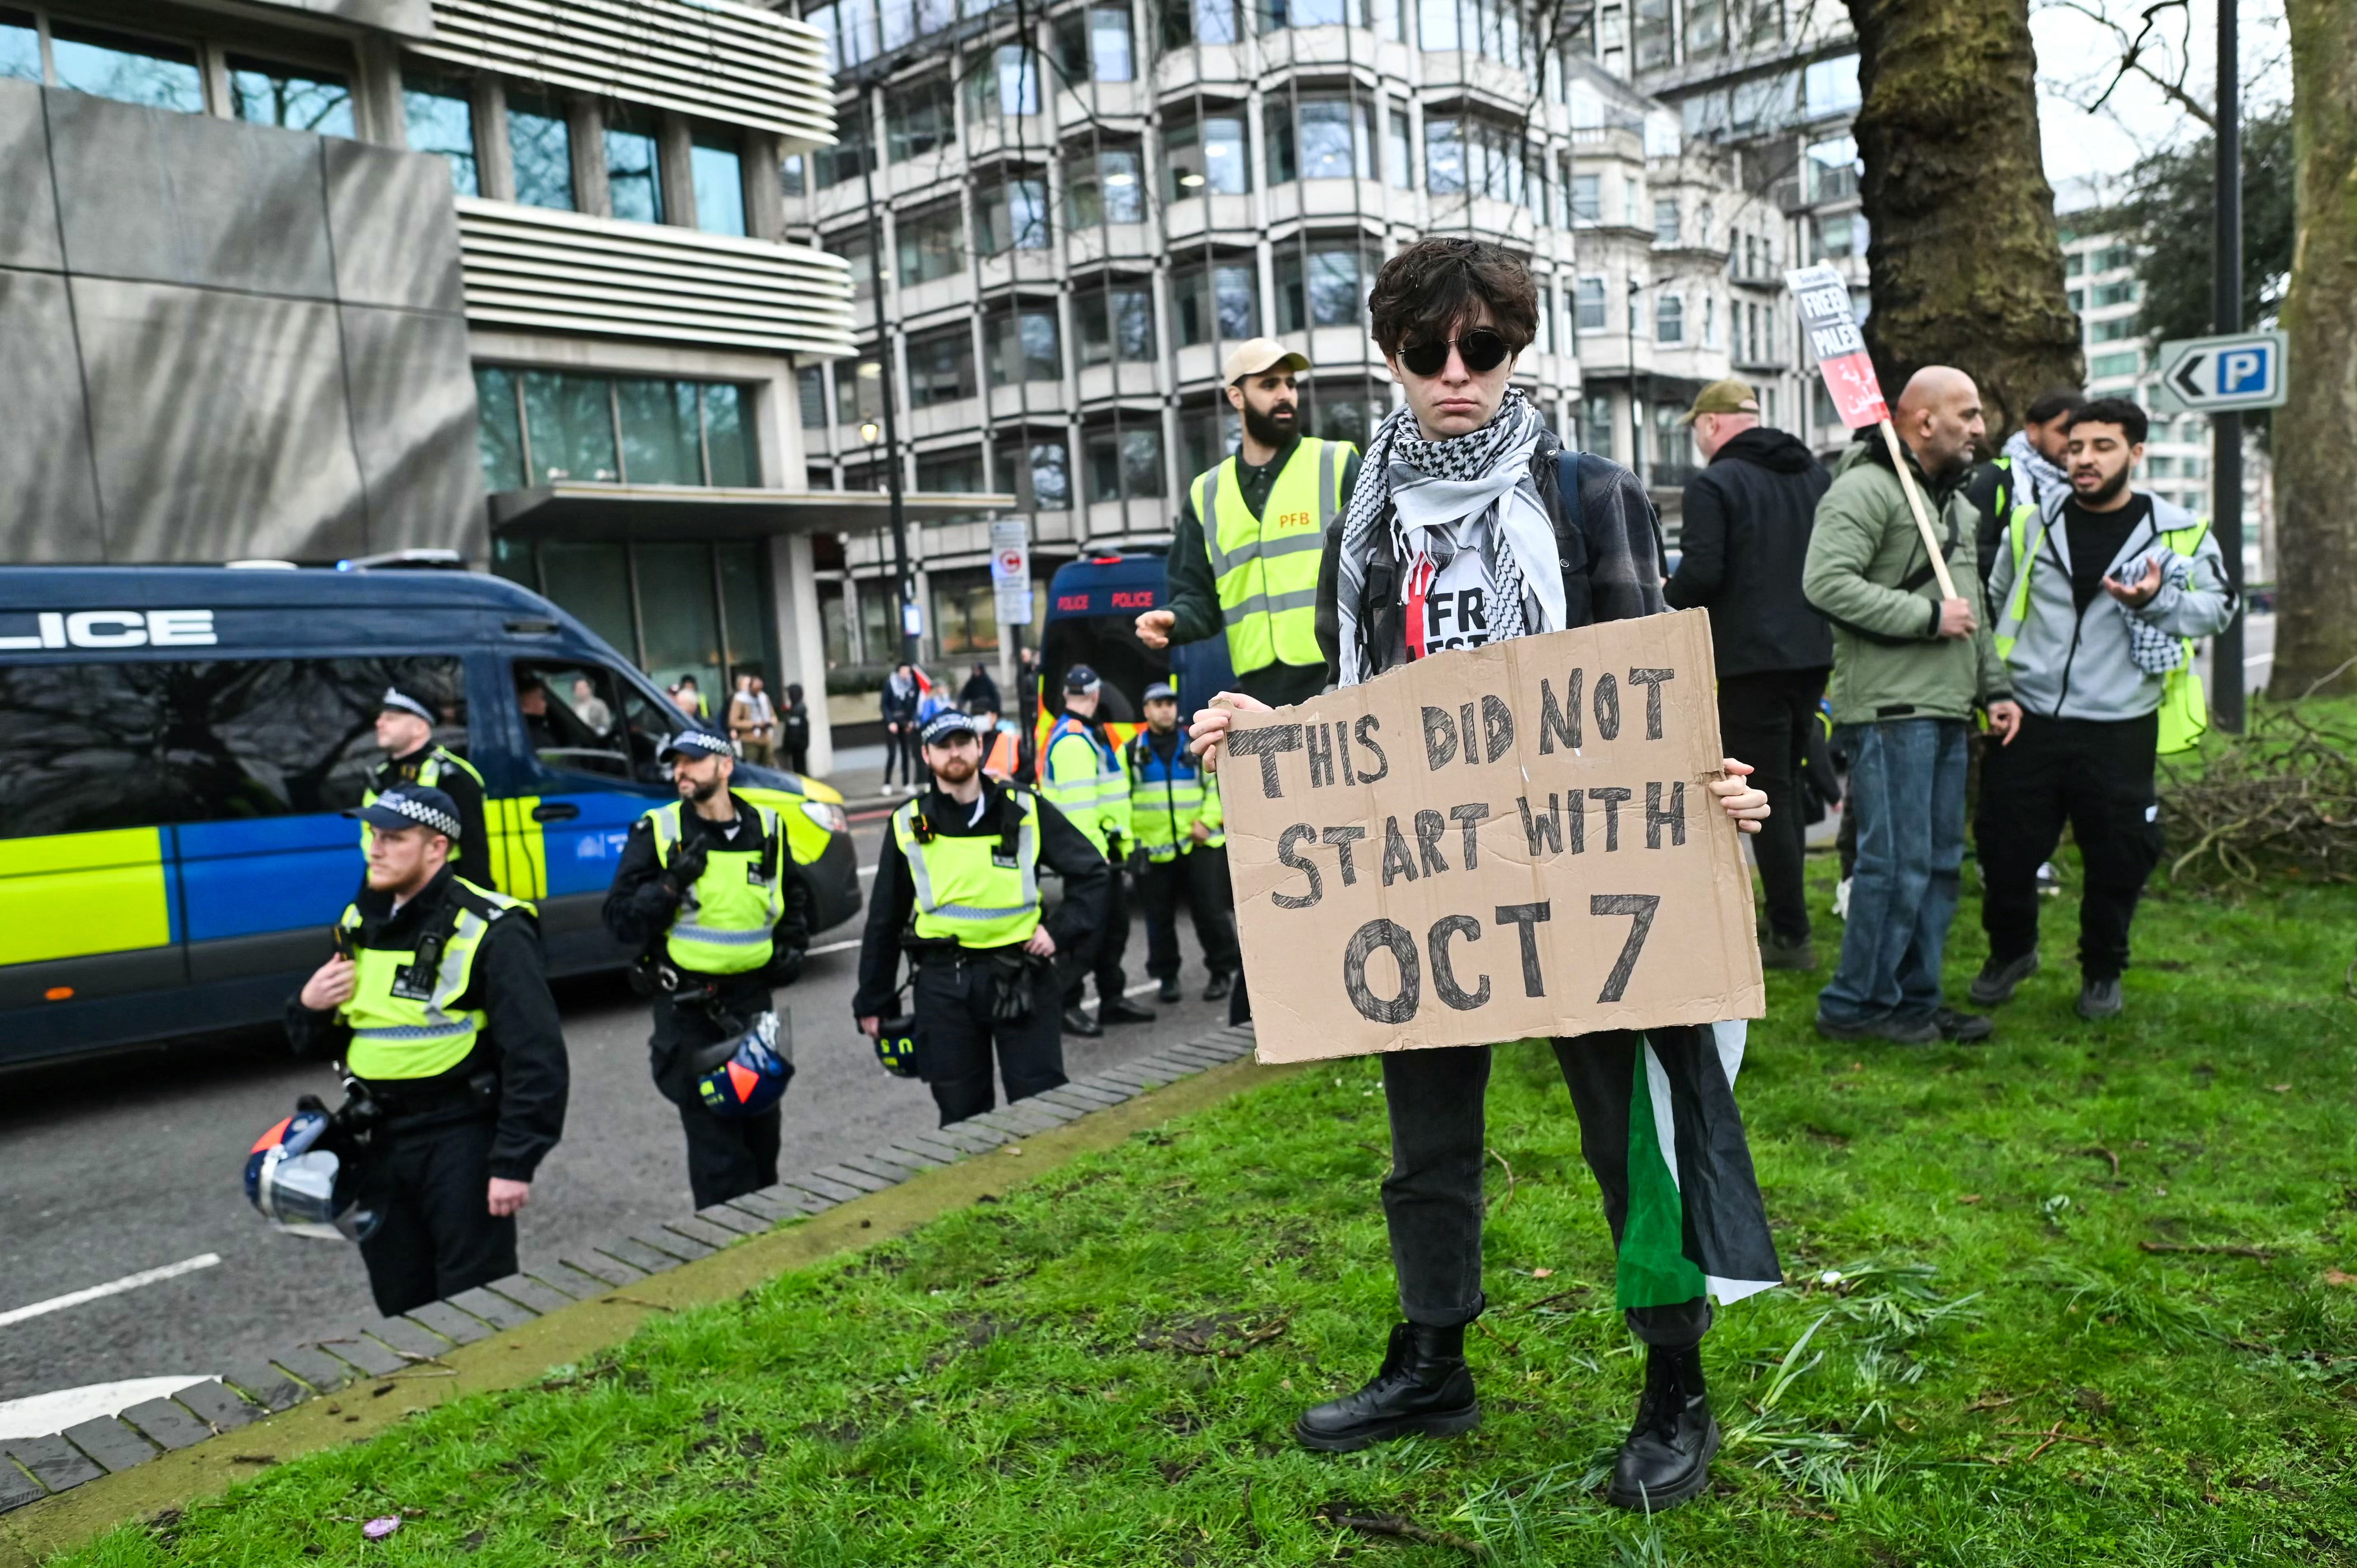 You’d better move on: police keep a watchful eye over a protester at the National March for Palestine in London last month